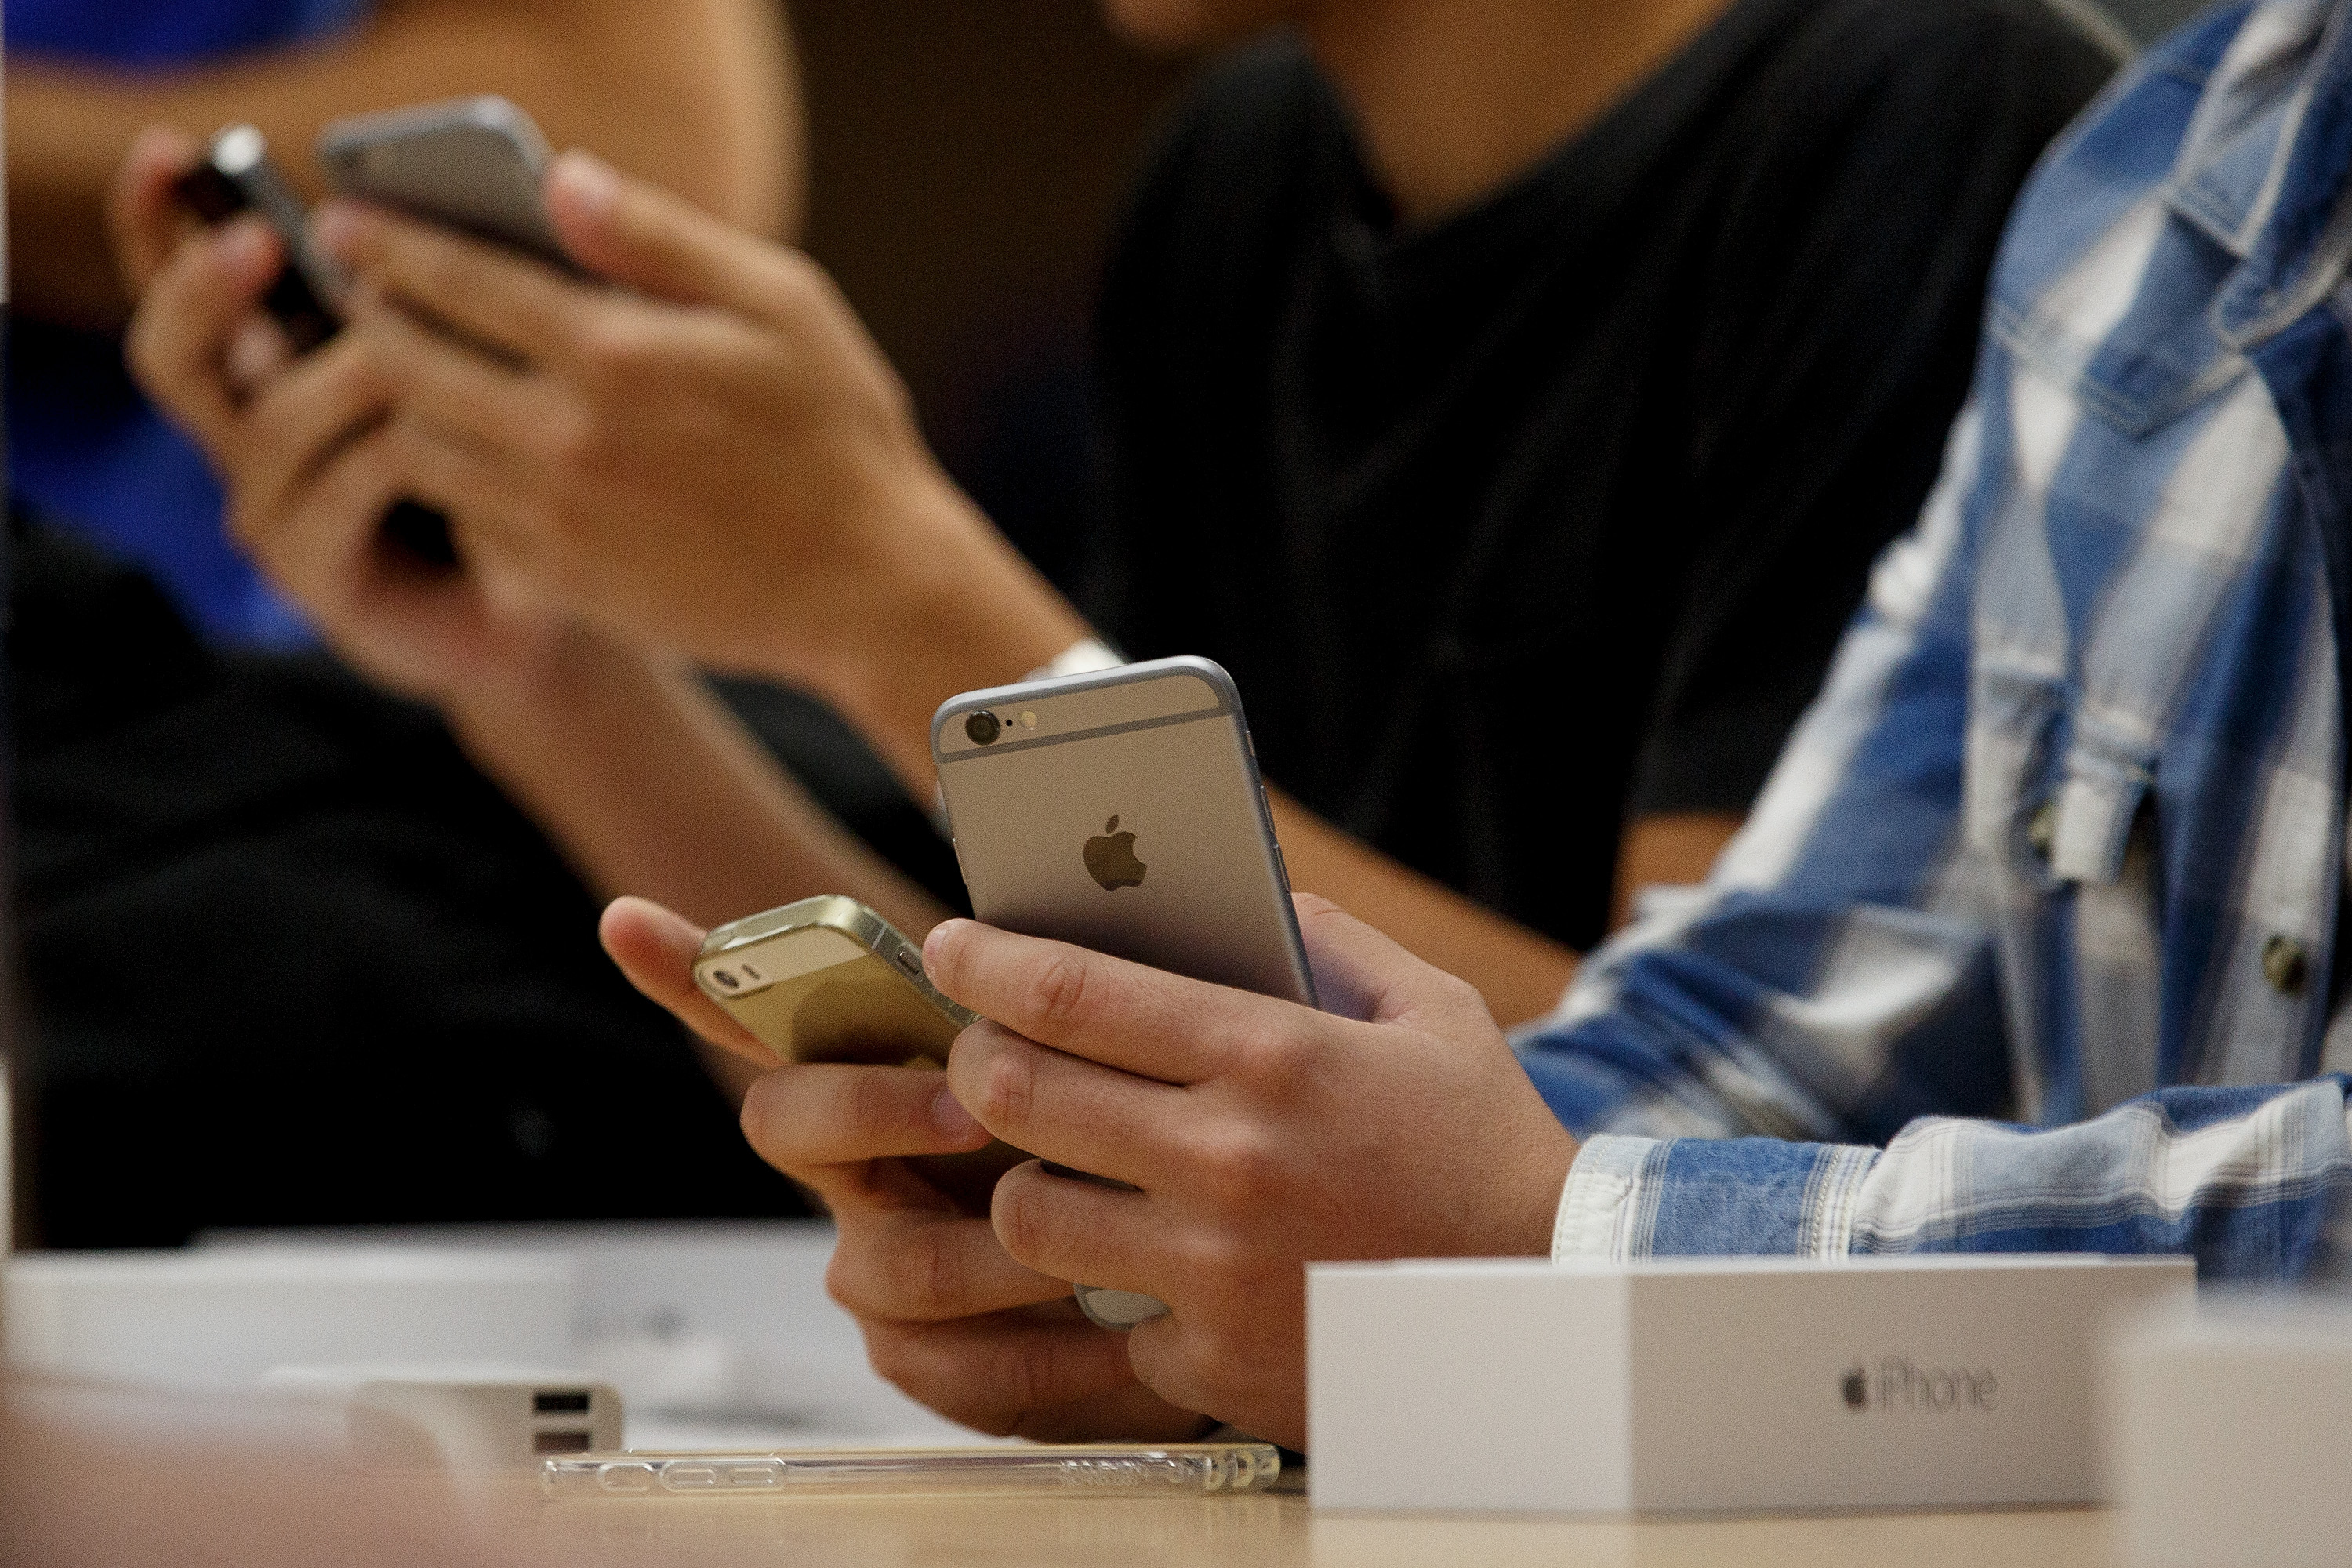 Customers hold their new and old iPhones to get them set up at Puerta del Sol Apple Store as Apple launches iPhone 6 and iPhone 6 Plus on September 26, 2014 in Madrid, Spain. (Pablo Blazquez Dominguez&mdash;Getty Images)